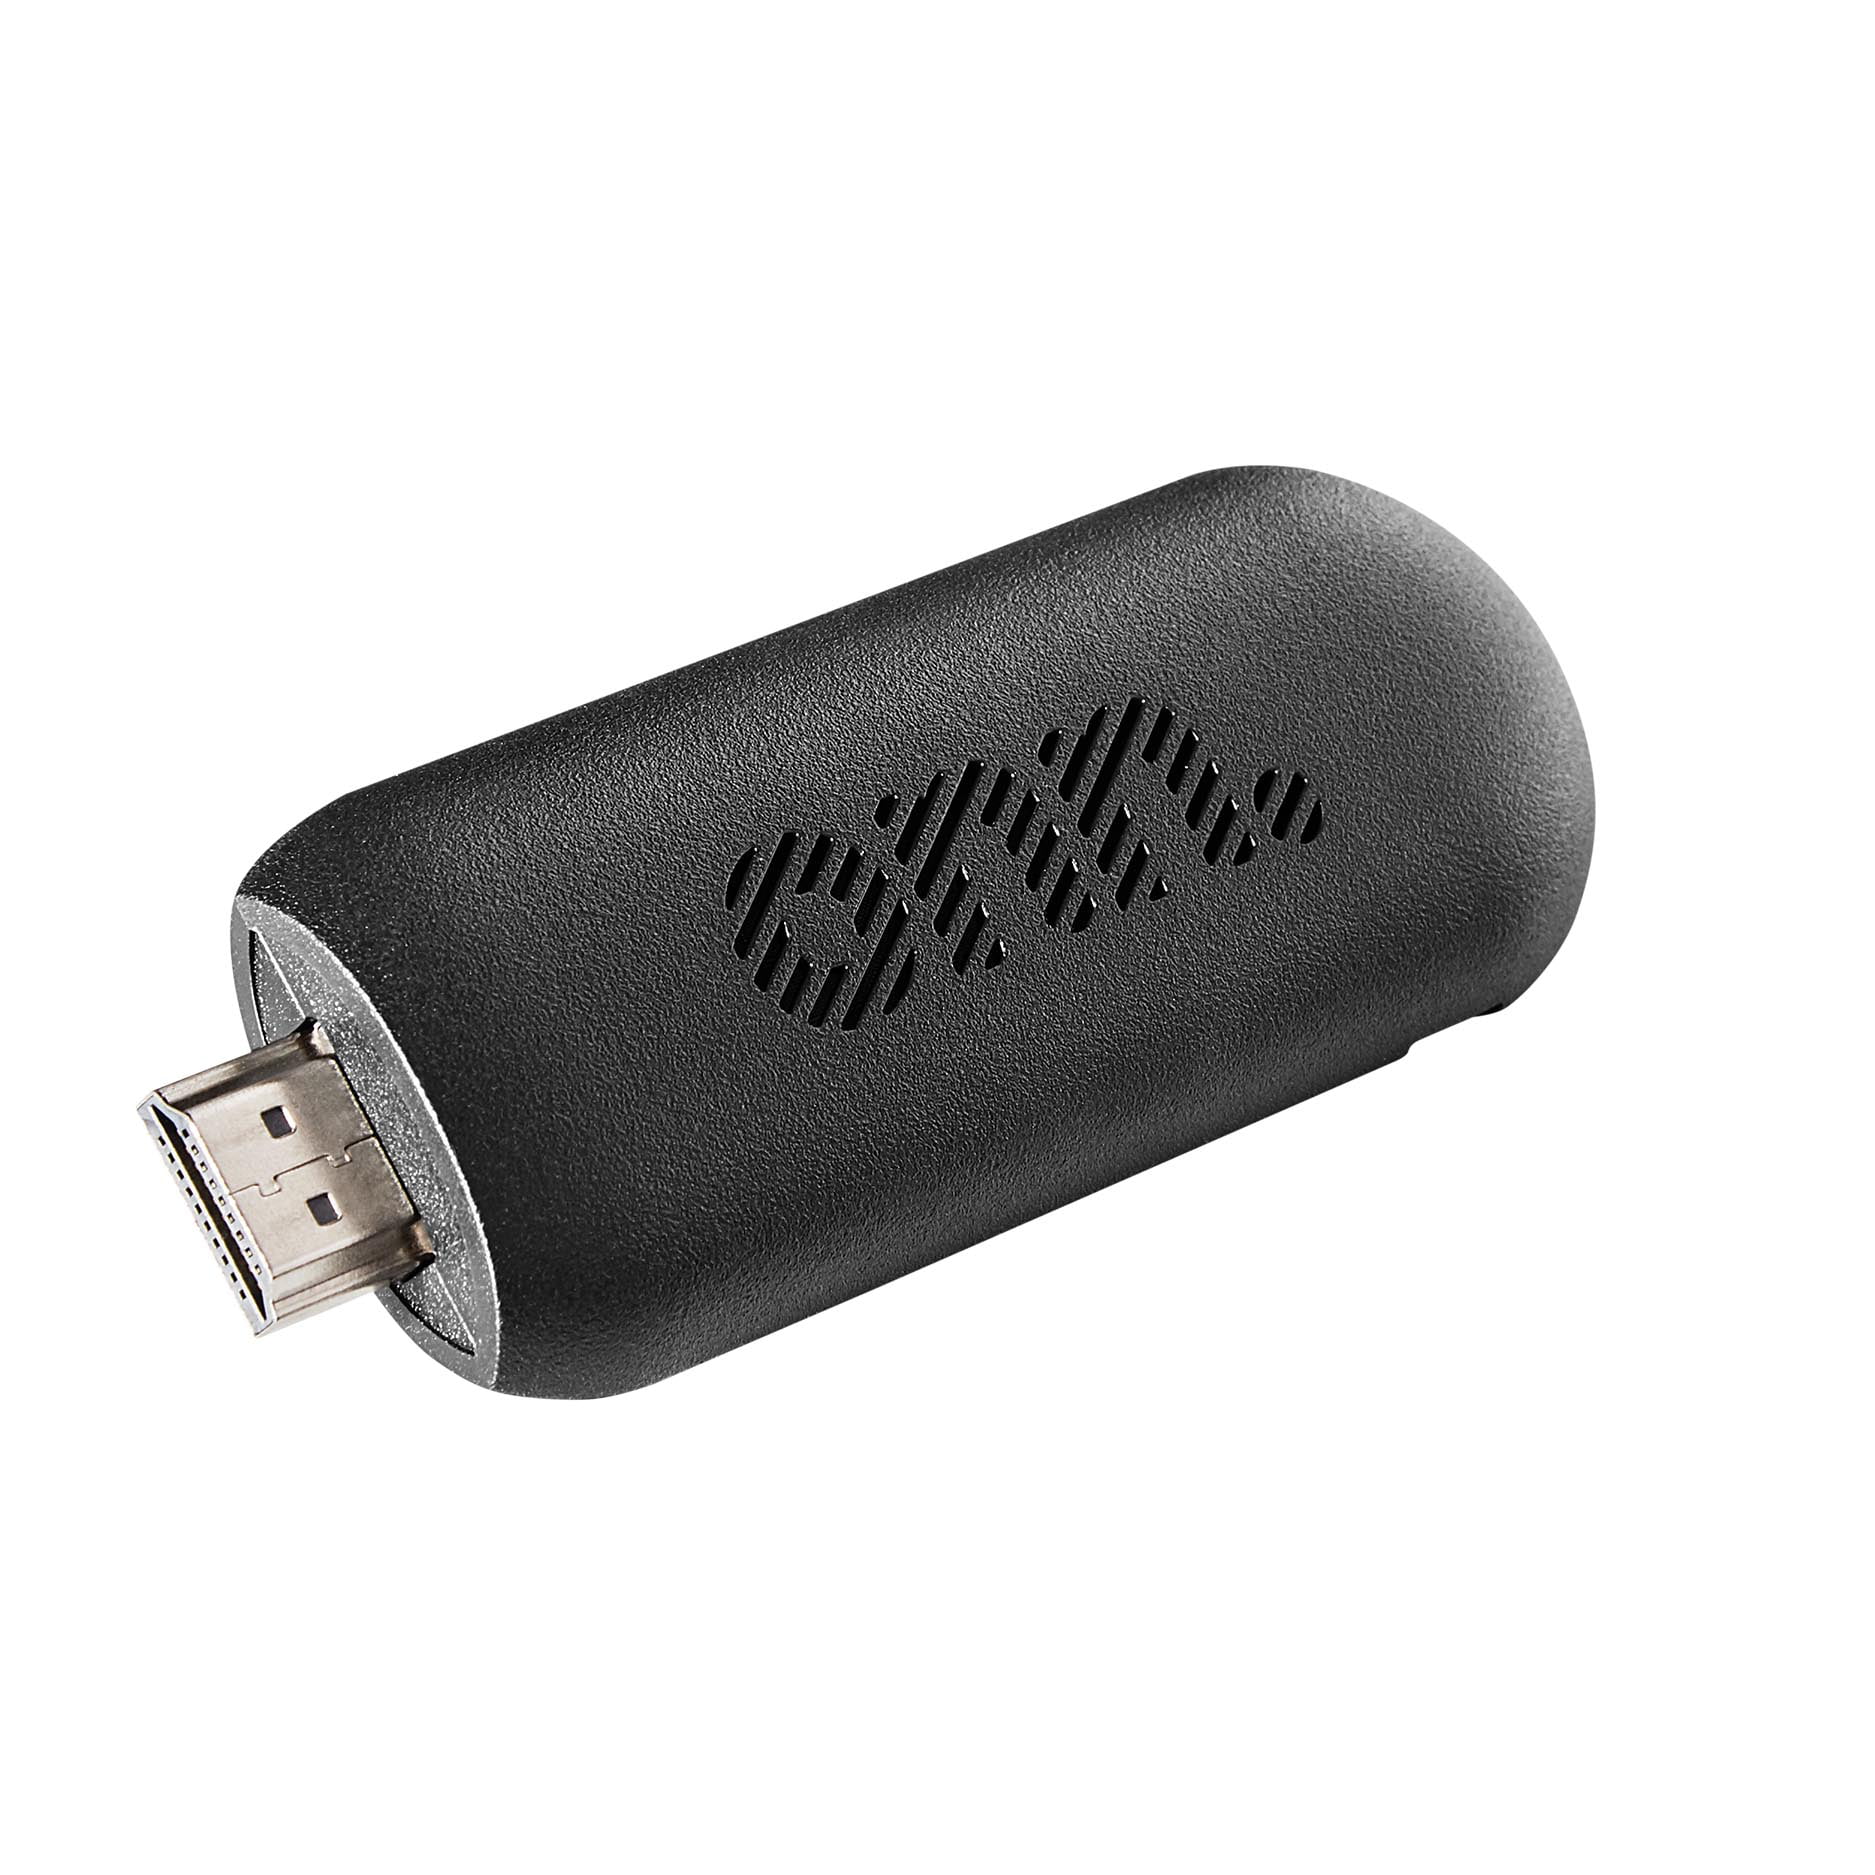 Select Walmart Stores: onn. Android TV 2K FHD Streaming Stick $6 (In-Store Purchase Only)